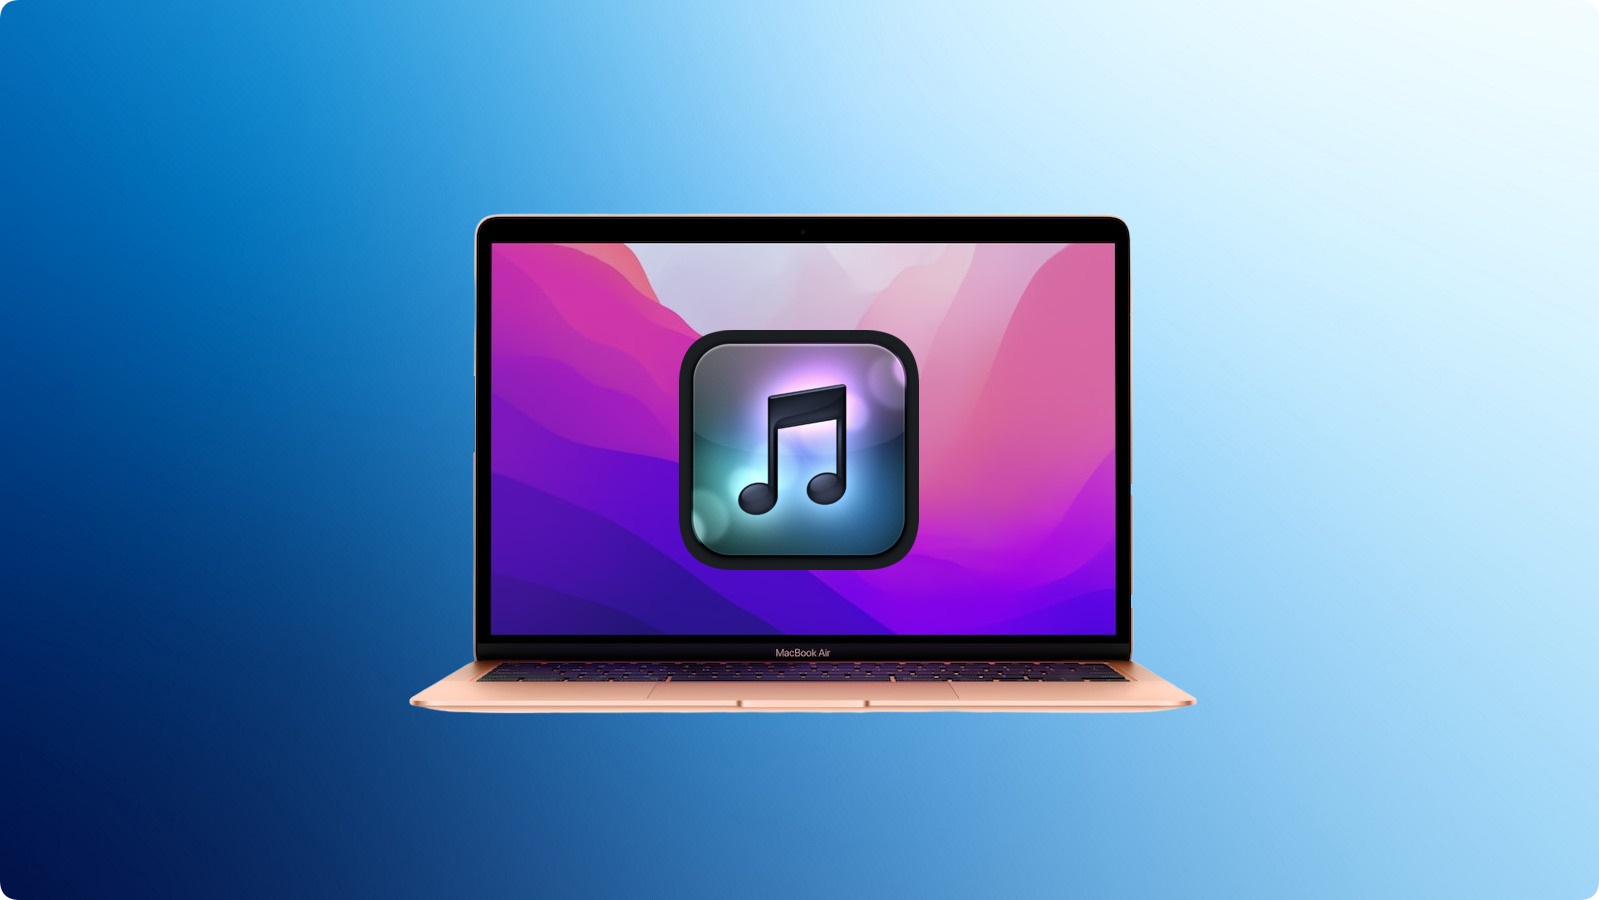 mp3 player for macos